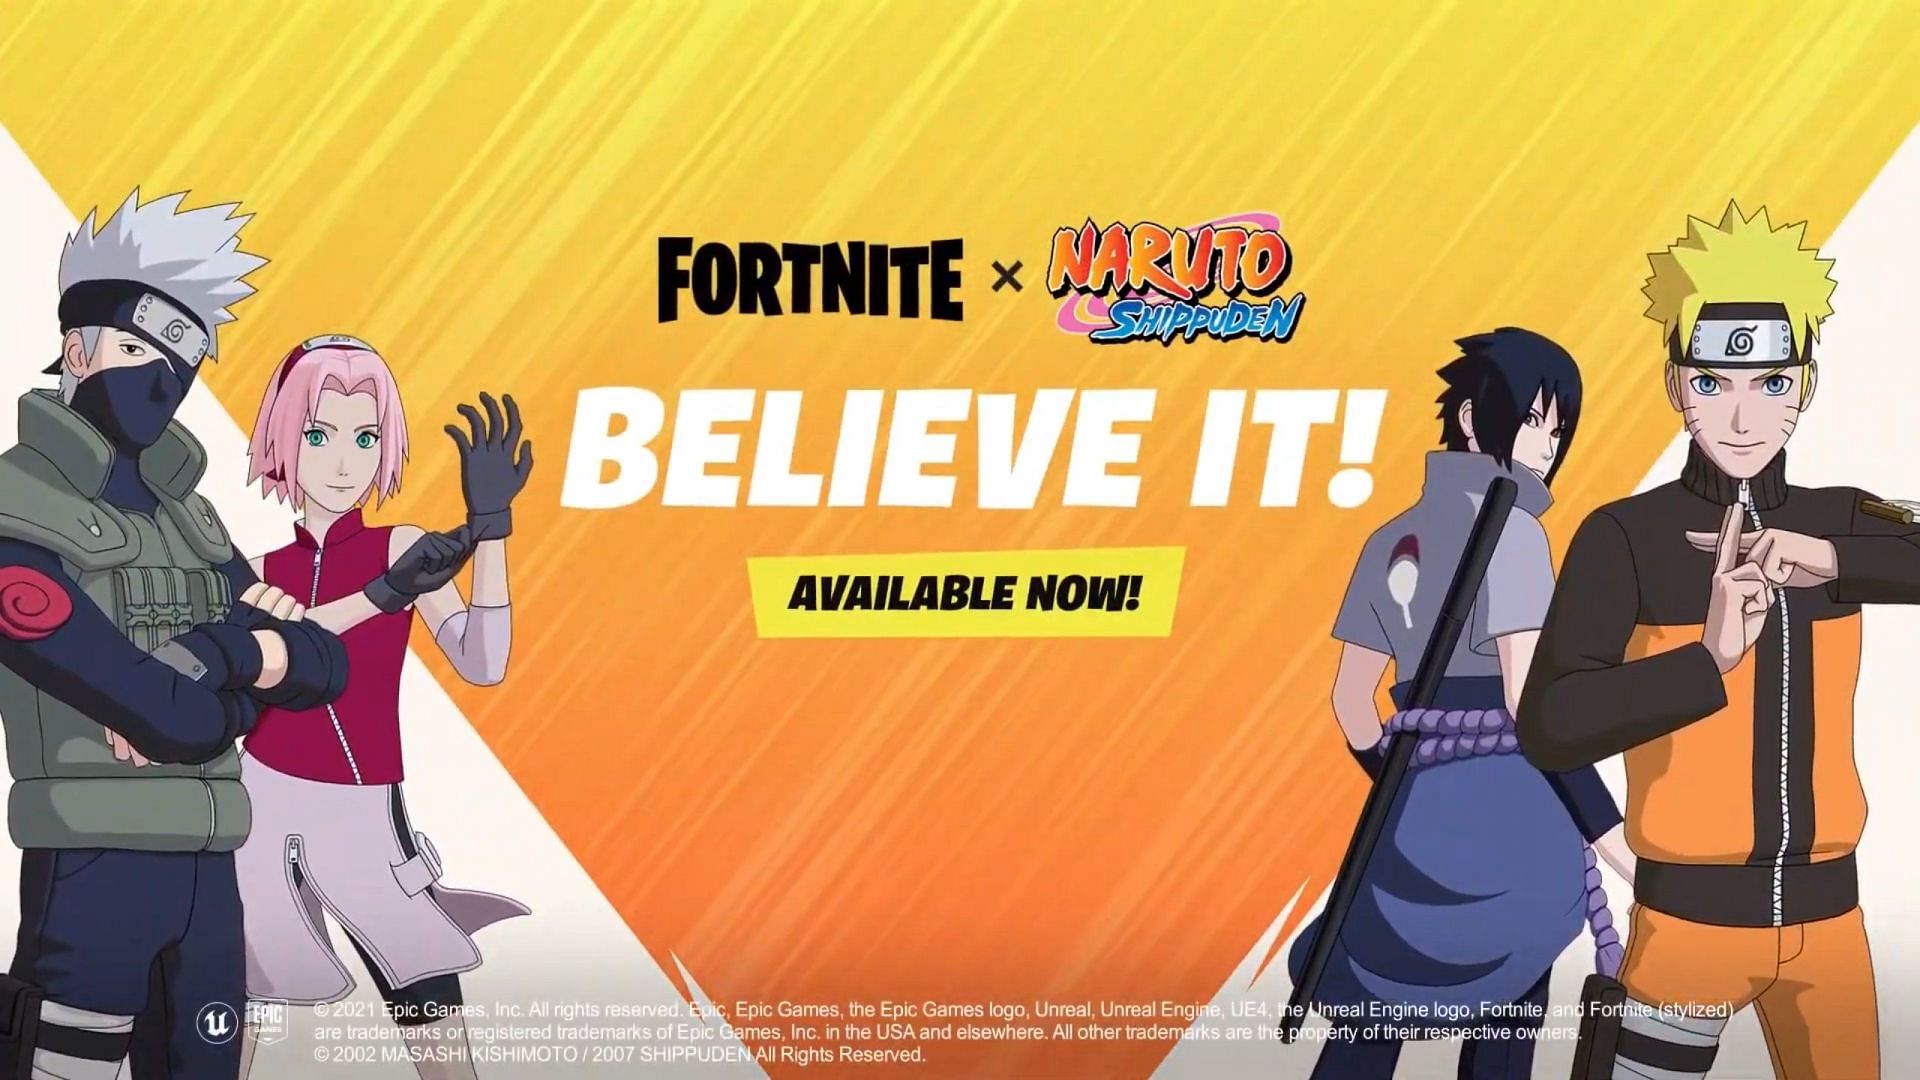 Fortnite x Naruto cosmetics are available from the Item Shop (Image via Shiina/Twitter)